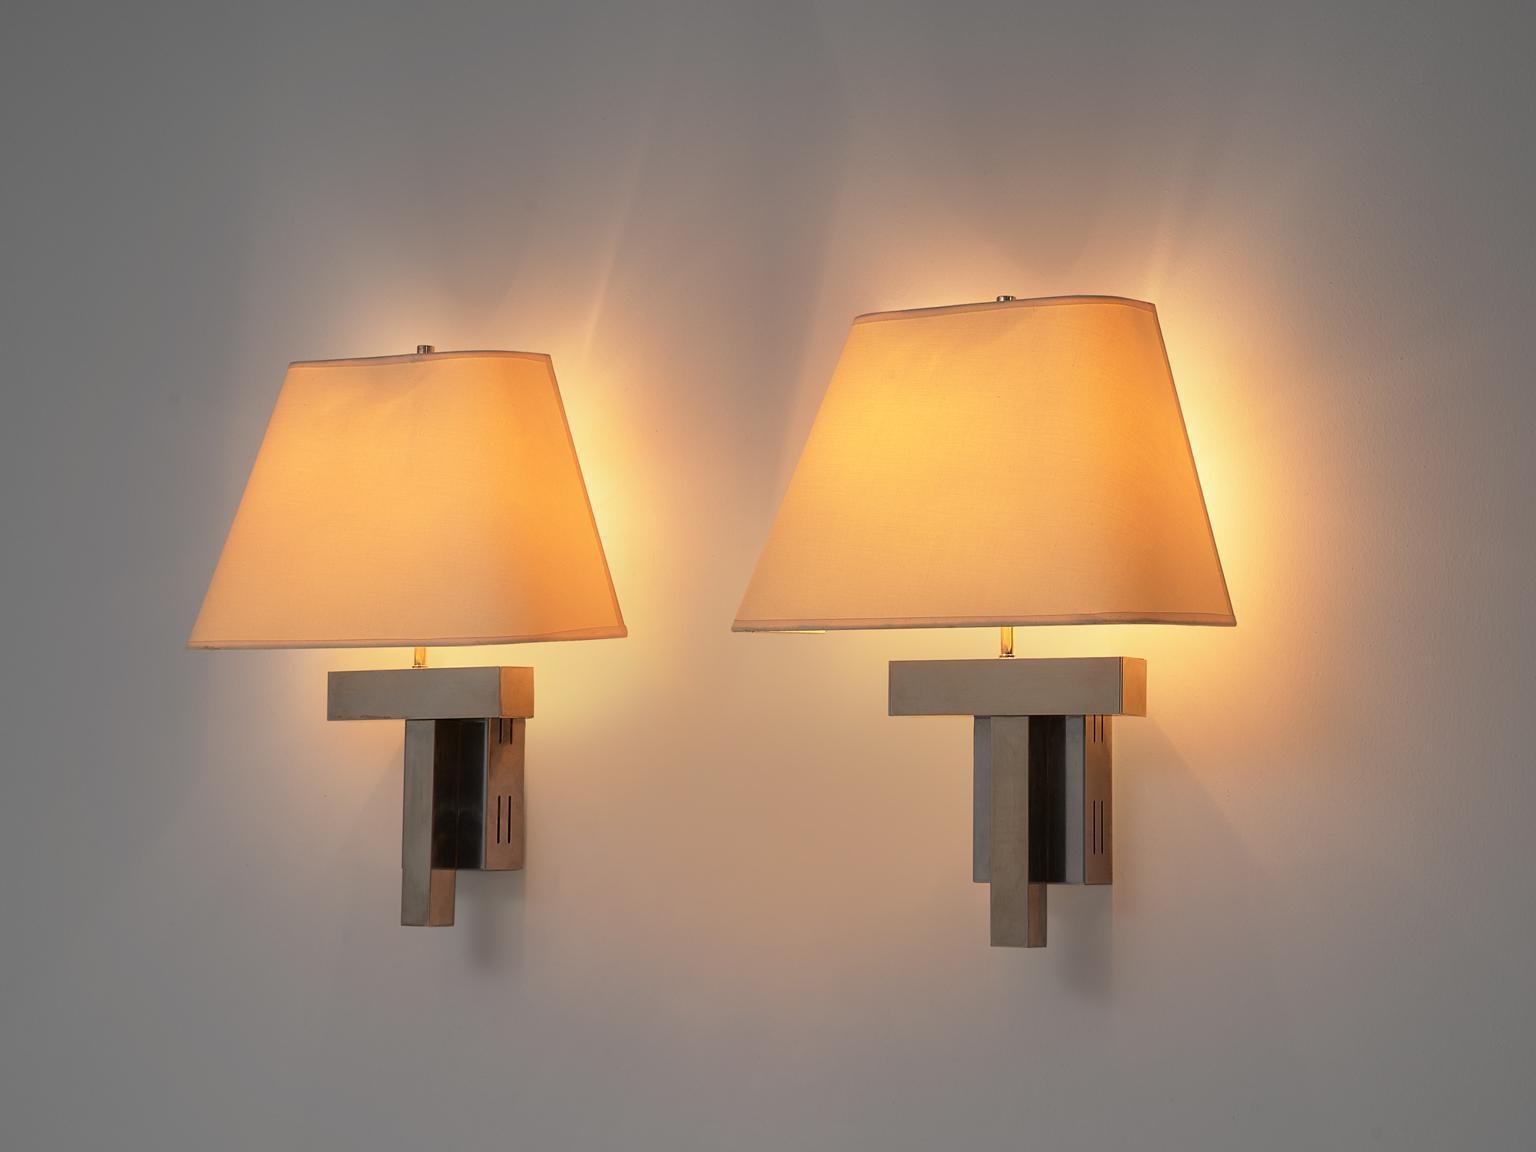 Wall lights, chrome and canvas, Europe, 1970s

This large set of wall-mounted light shades feature a modest design that fits well as extra details in any kind of interior. The cubist frame is made of chromed steel and the shade is made of canvas.